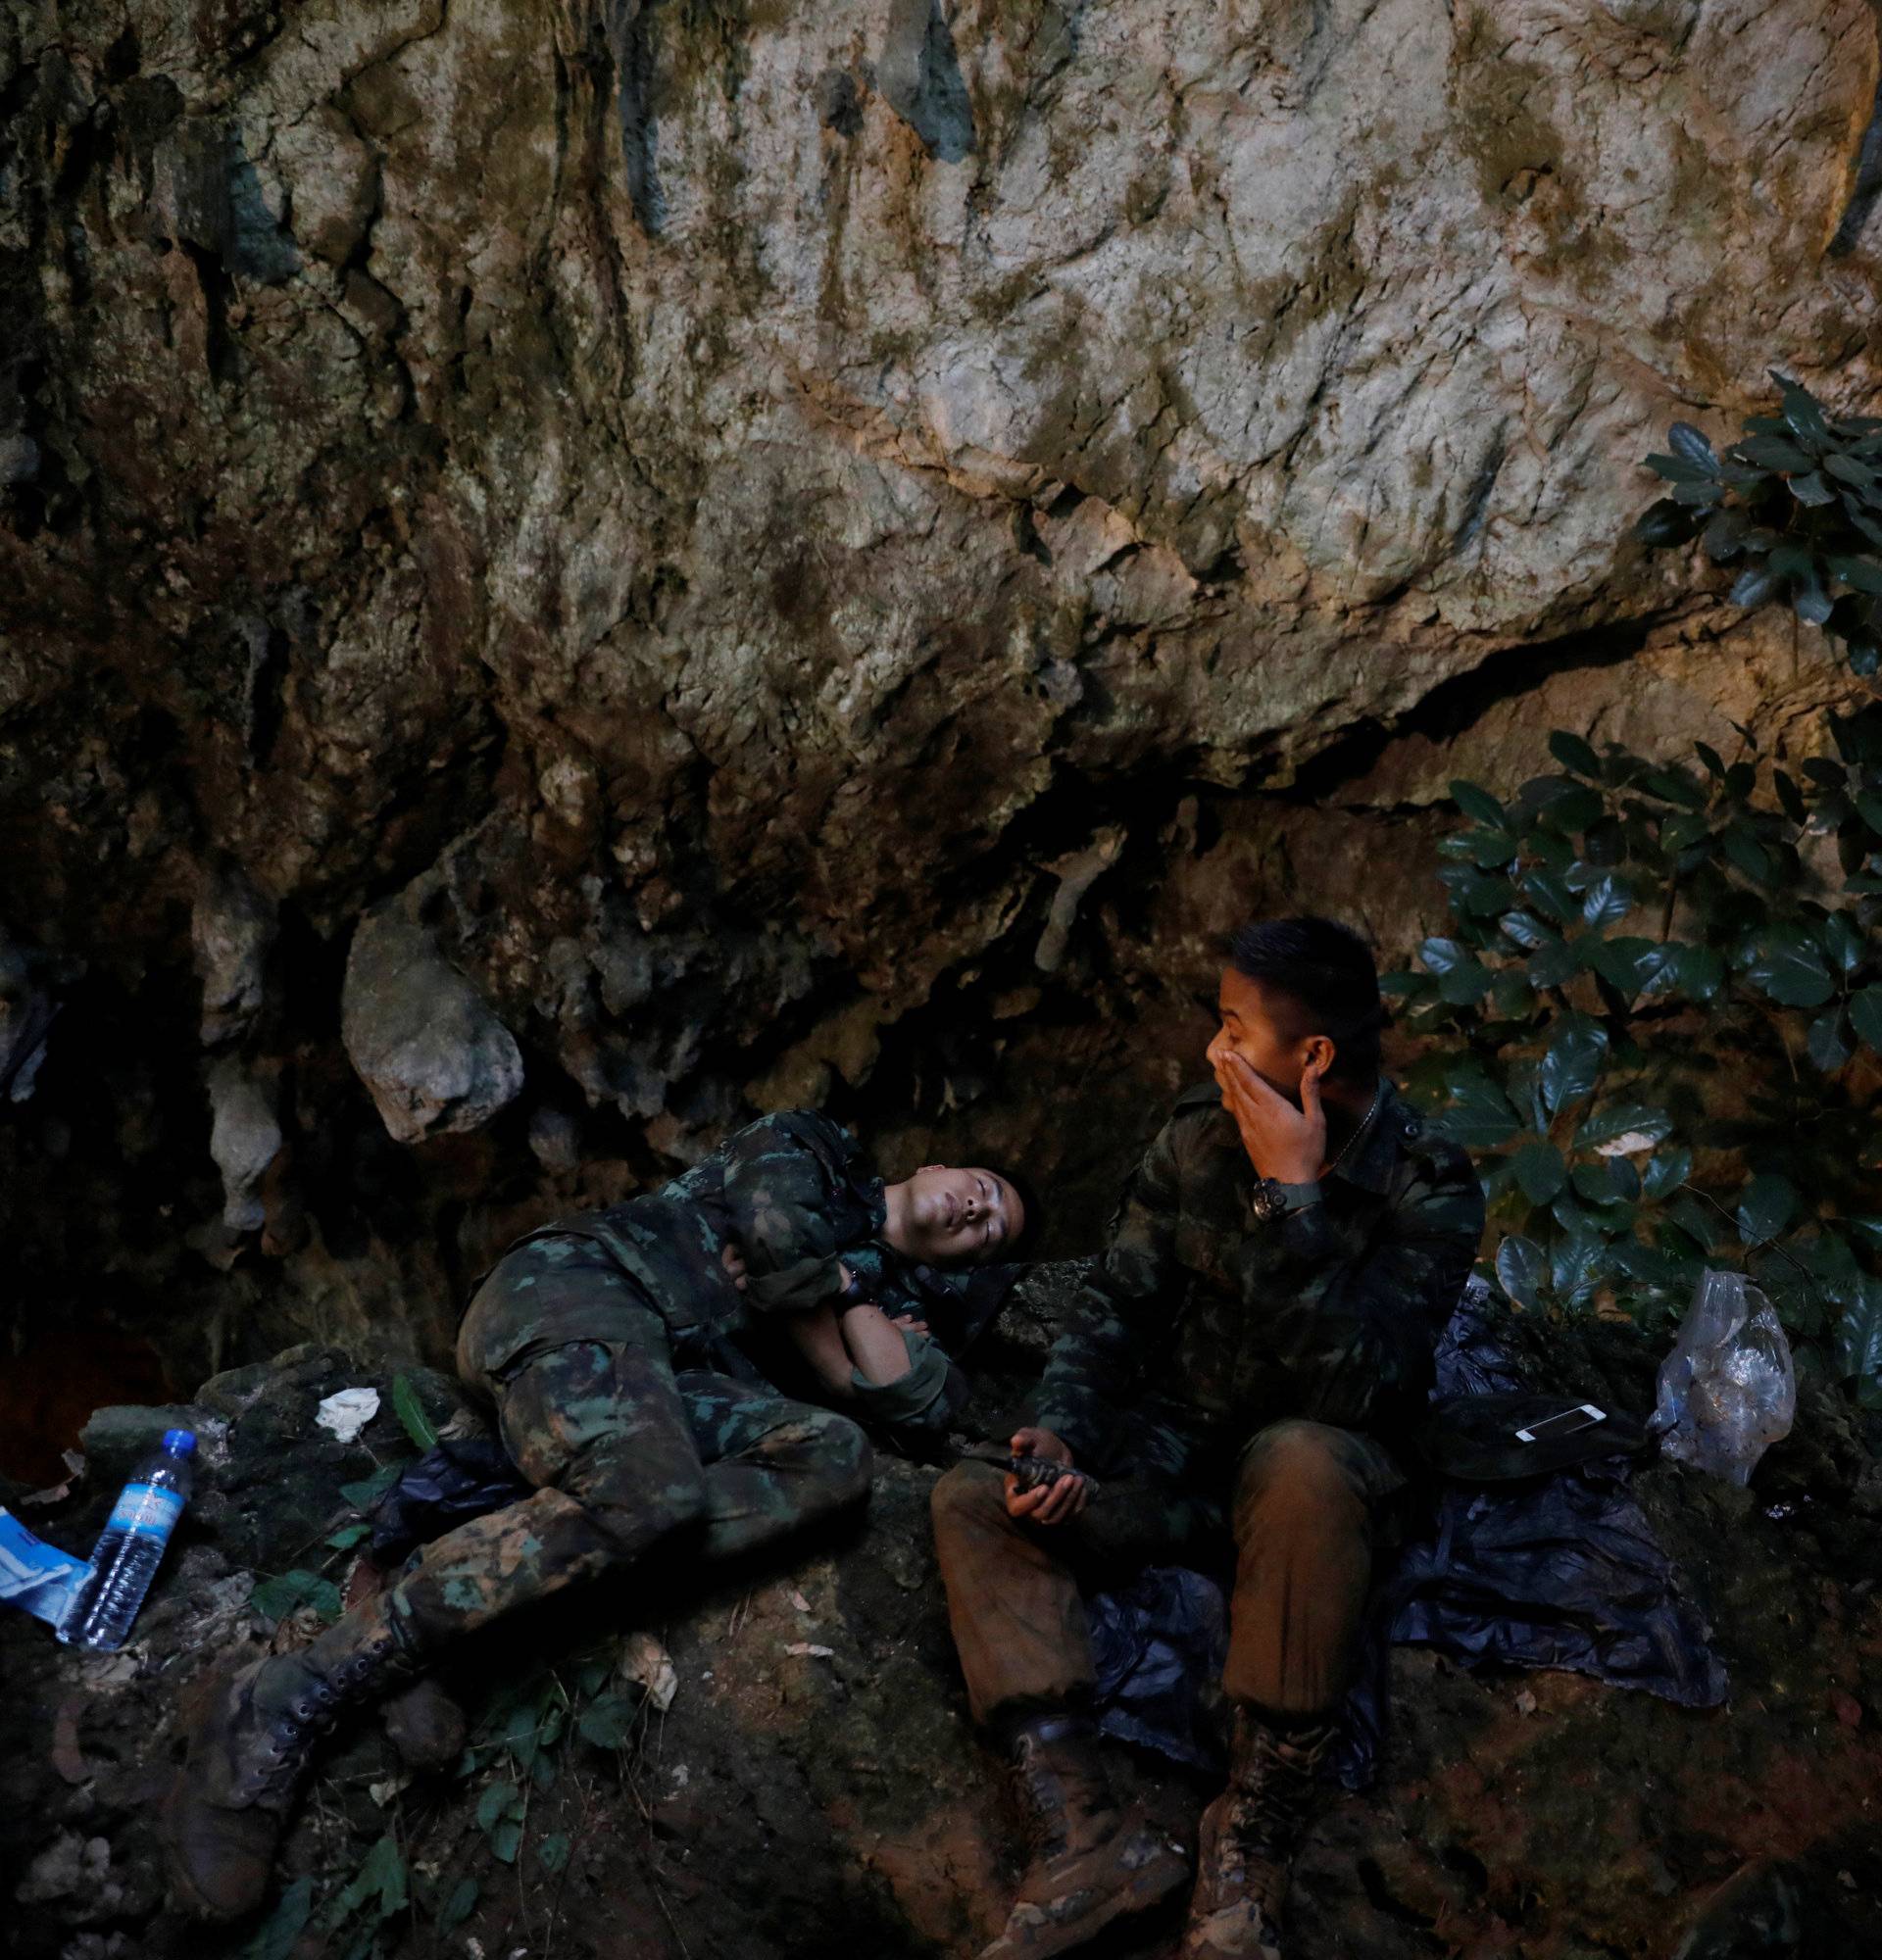 Soldiers take a rest in Tham Luang caves during a search for 12 members of an under-16 soccer team and their coach, in the northern province of Chiang Rai